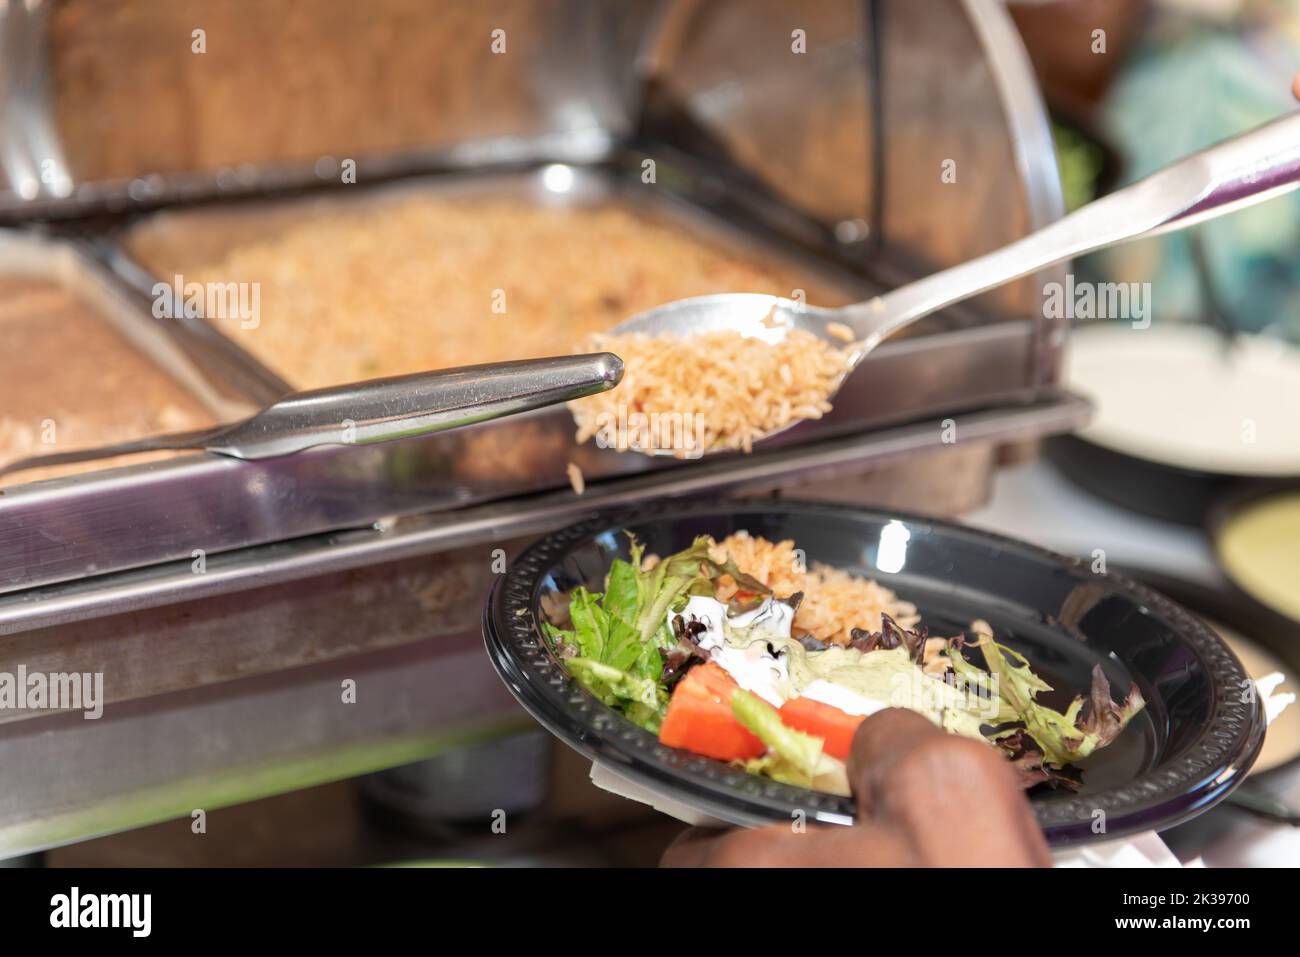 Party guest at the buffet line has a spoon full of Mexican rice to add to the plate of lunch food. Stock Photo